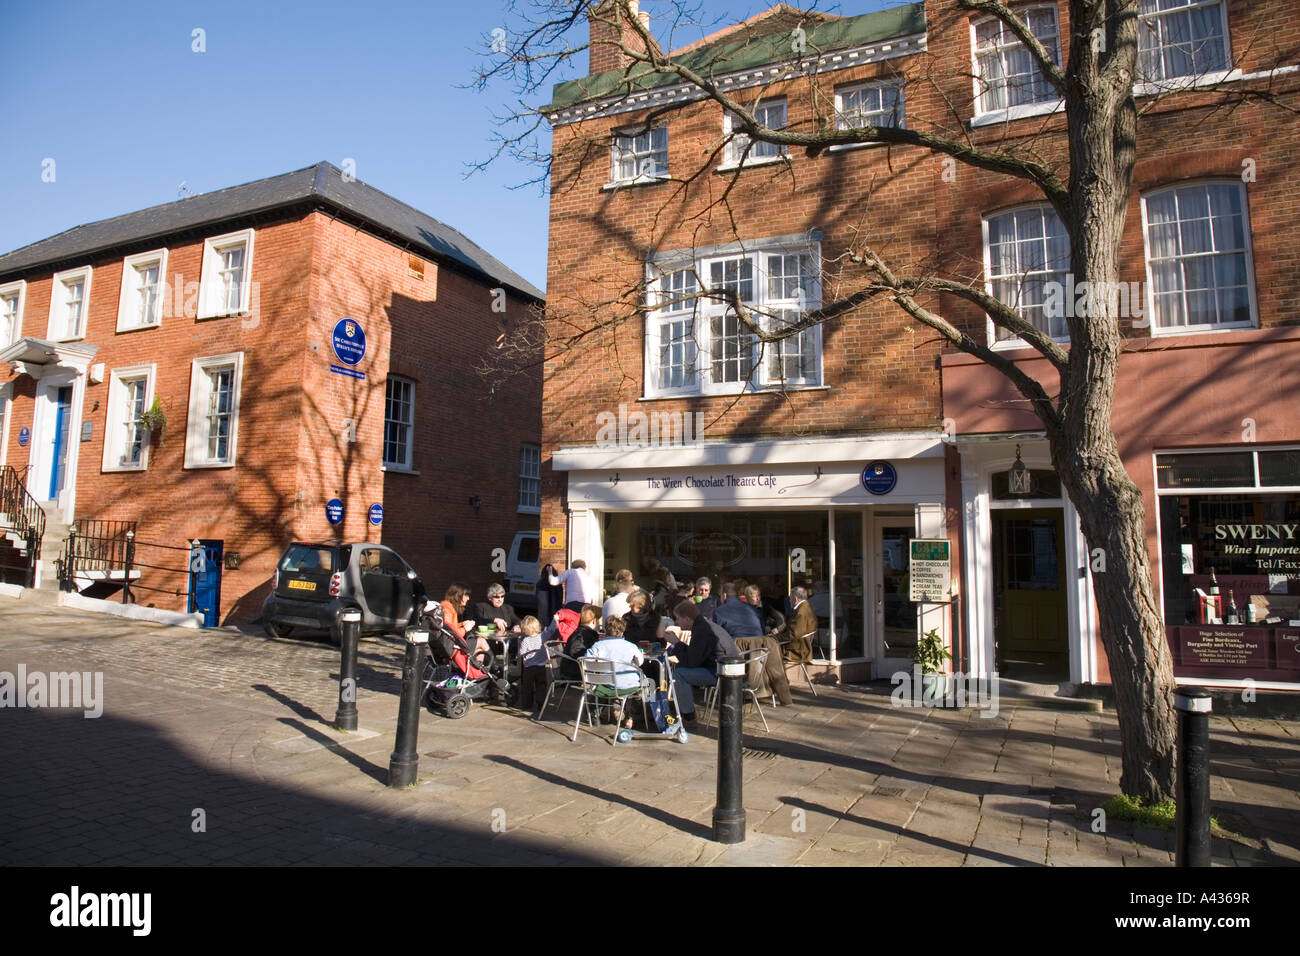 The Wren Chocolate Theatre Cafe and Sir Christopher Wren s House Hotel Annex Windsor, Berkshire. UK Stock Photo